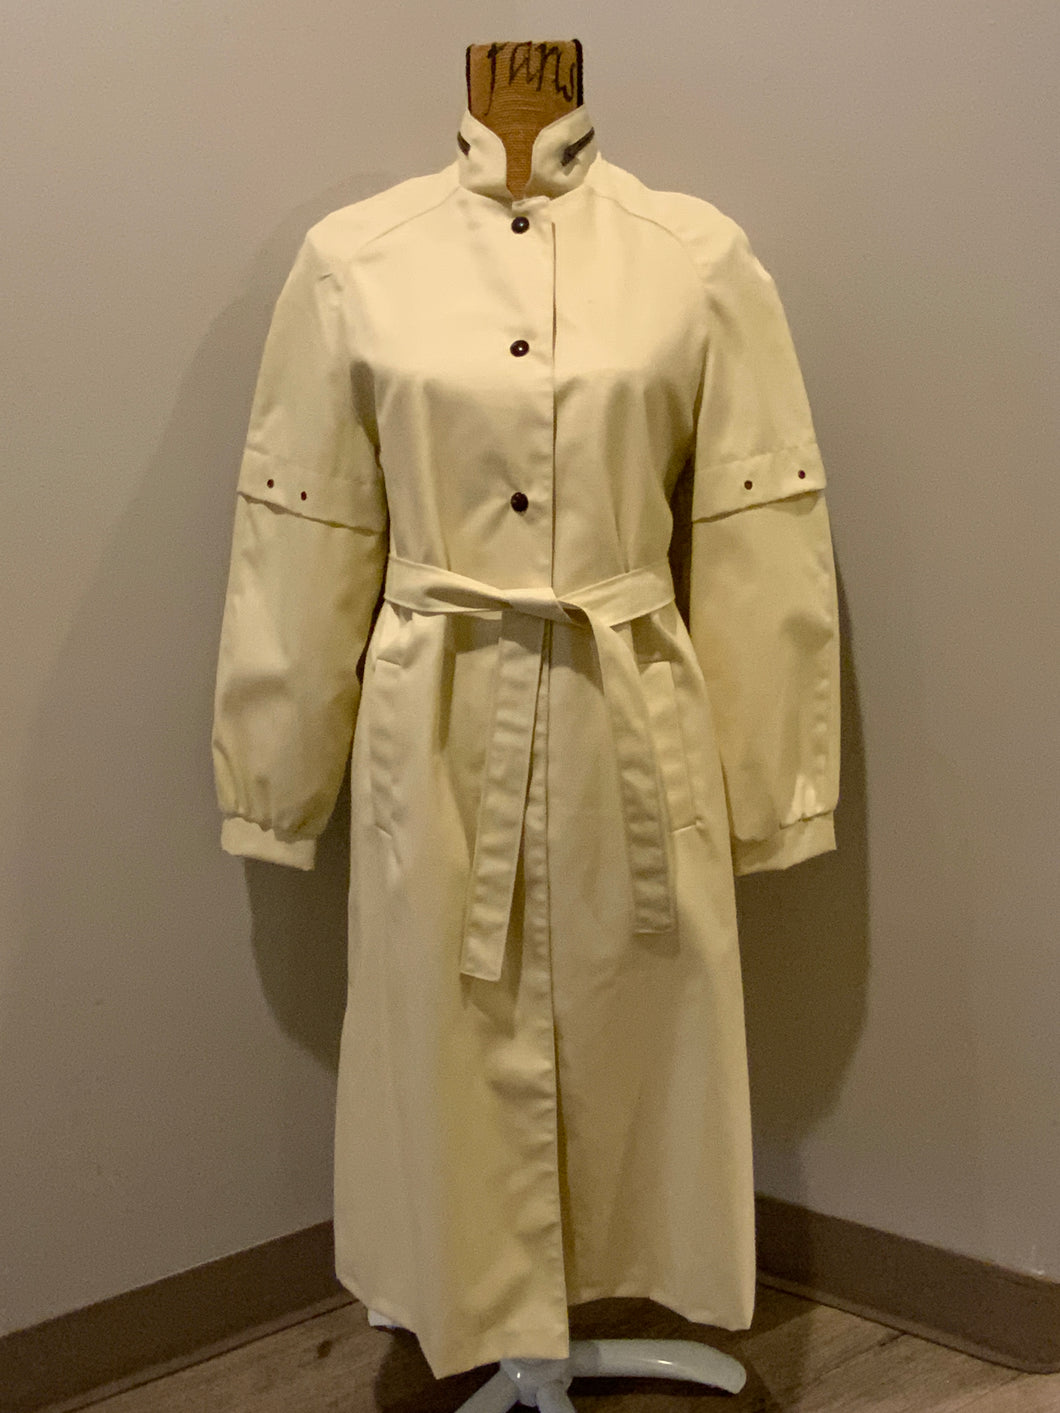 Kingspier Vintage - Westfield single breasted trench coat in cream with belt, snap closures, welt pockets and zip detail in collar. Made in Winnipeg, Canada. NWT, Size 8.